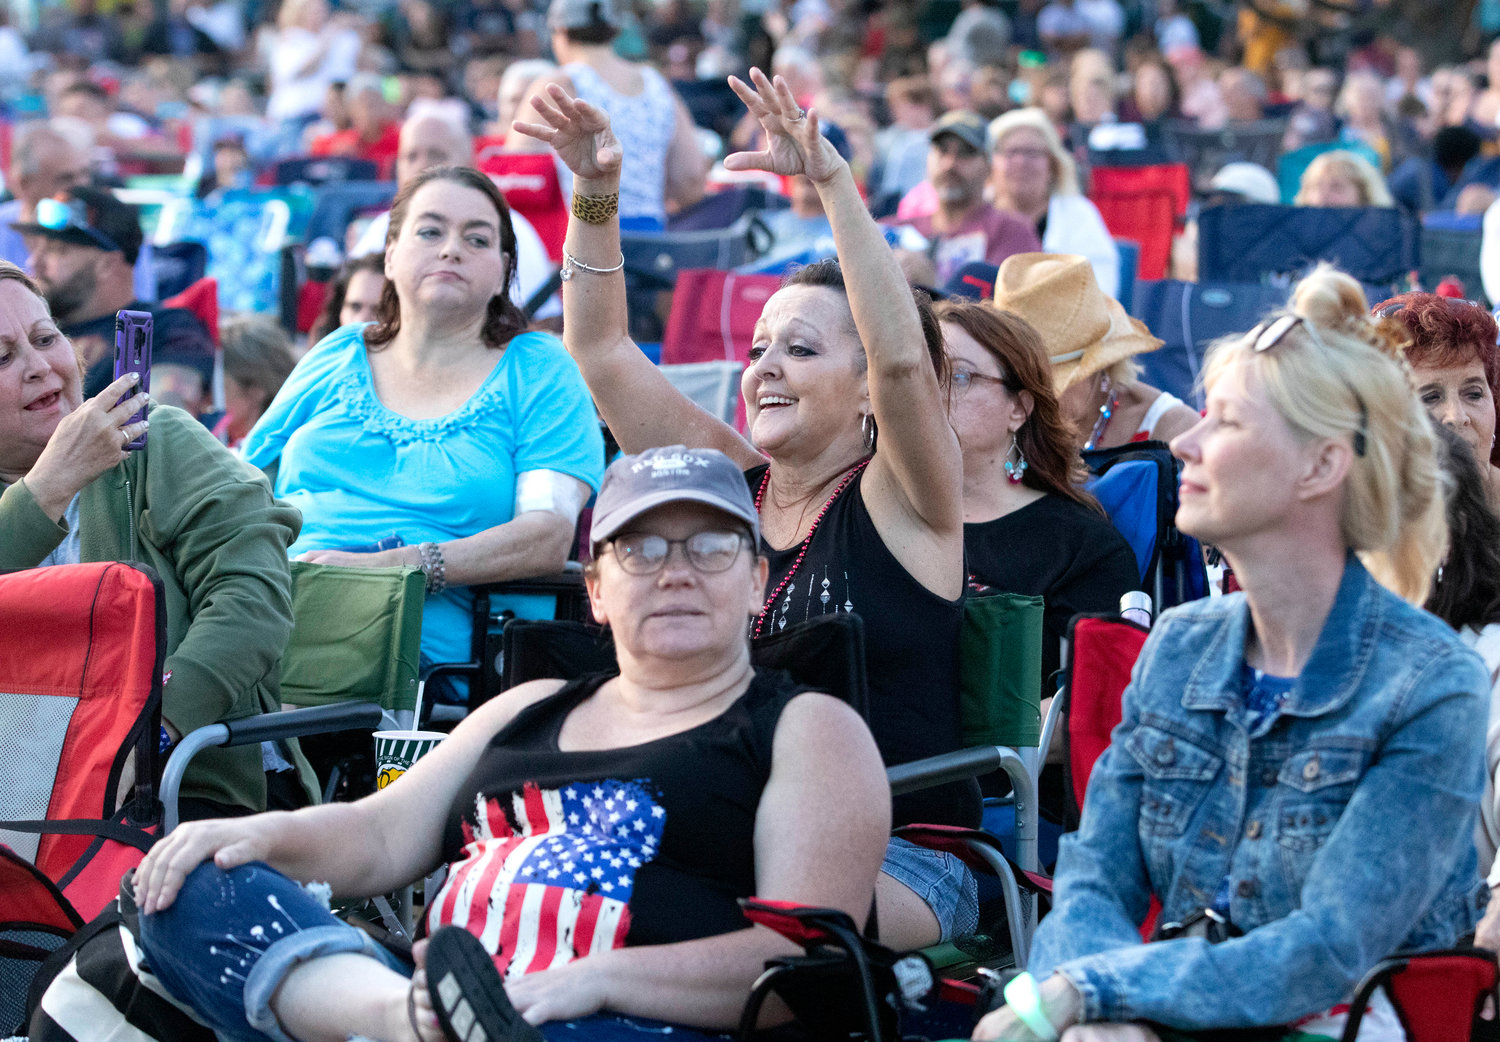 Jocelyn Oliveira (center) and others cheer as the band plays Bon Jovi's "Living on a Prayer."